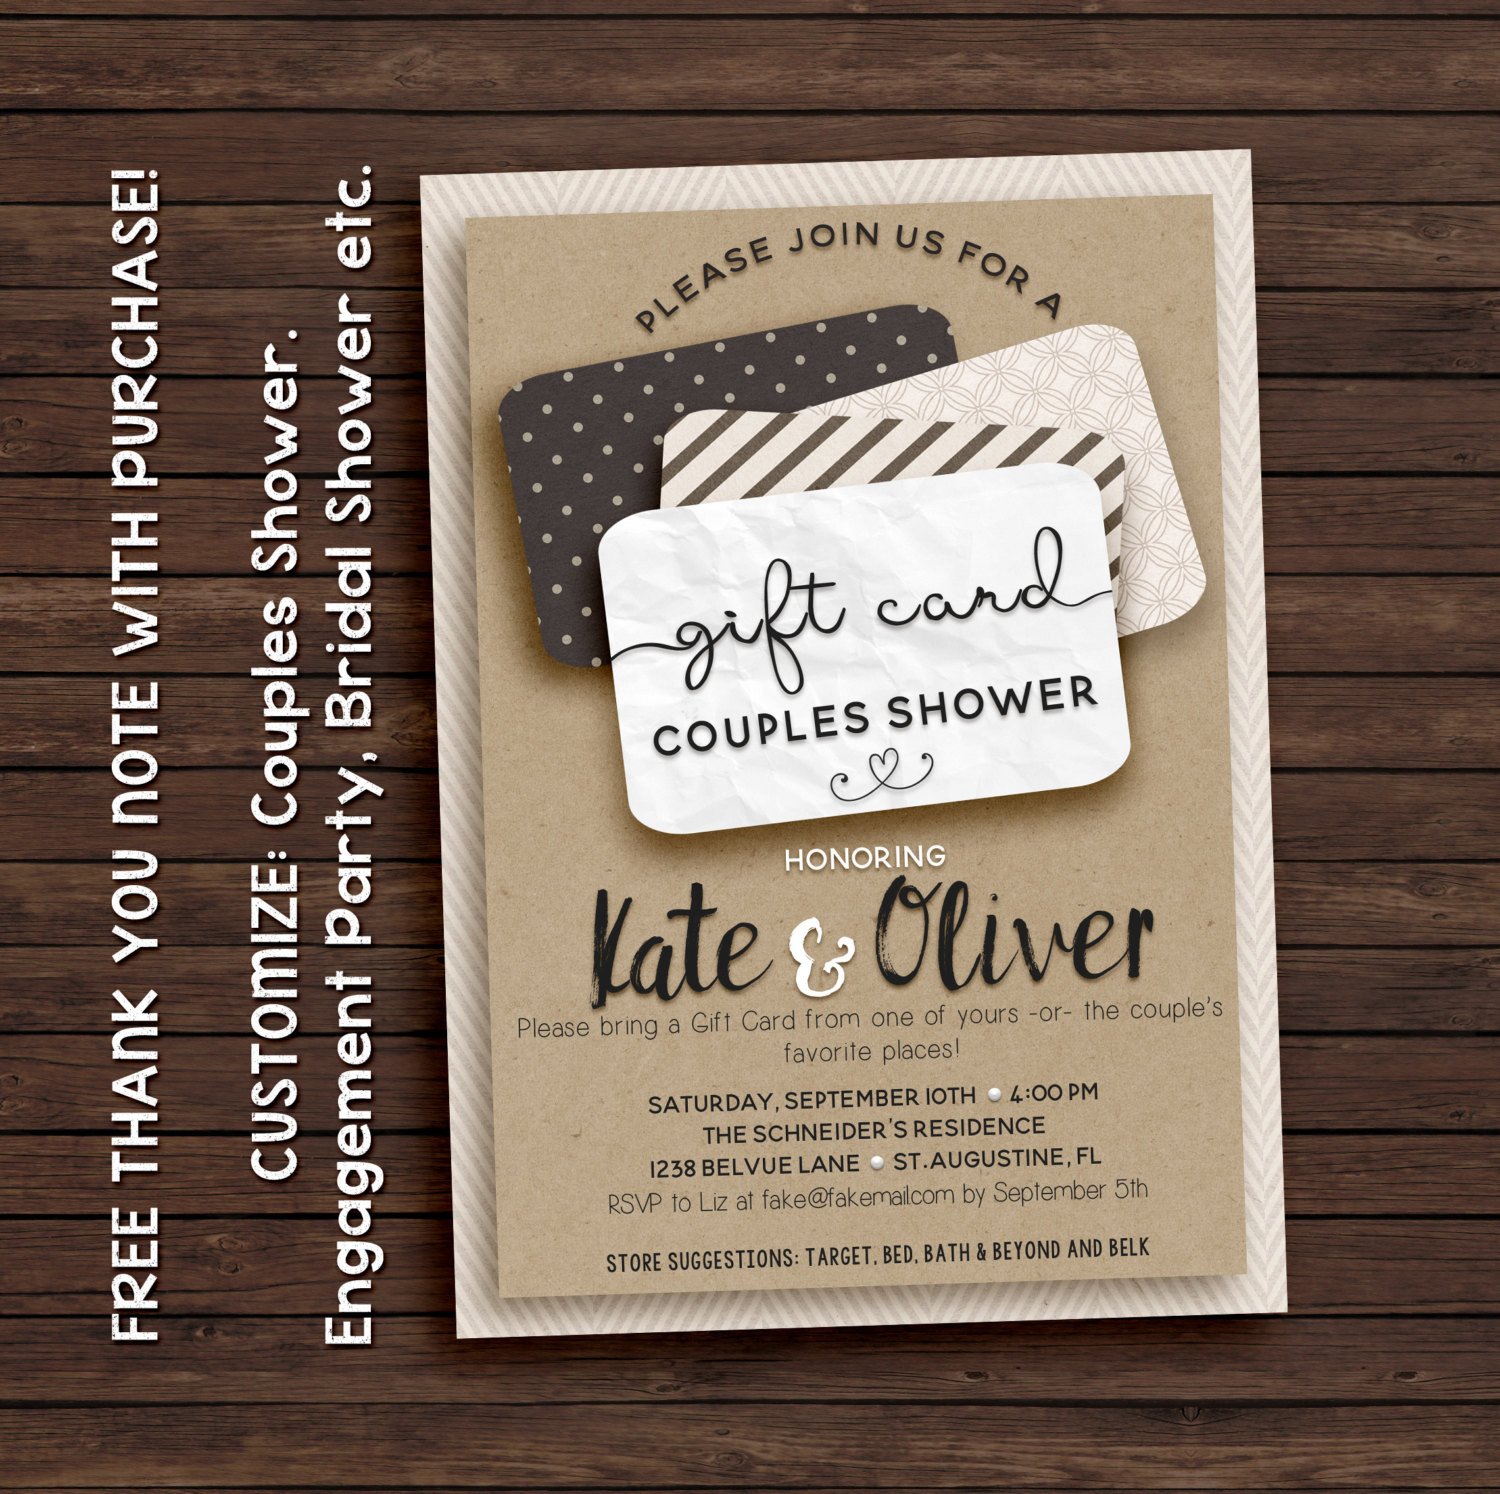 Couples Shower Gift Ideas
 Couples shower invitation t card invitation printable